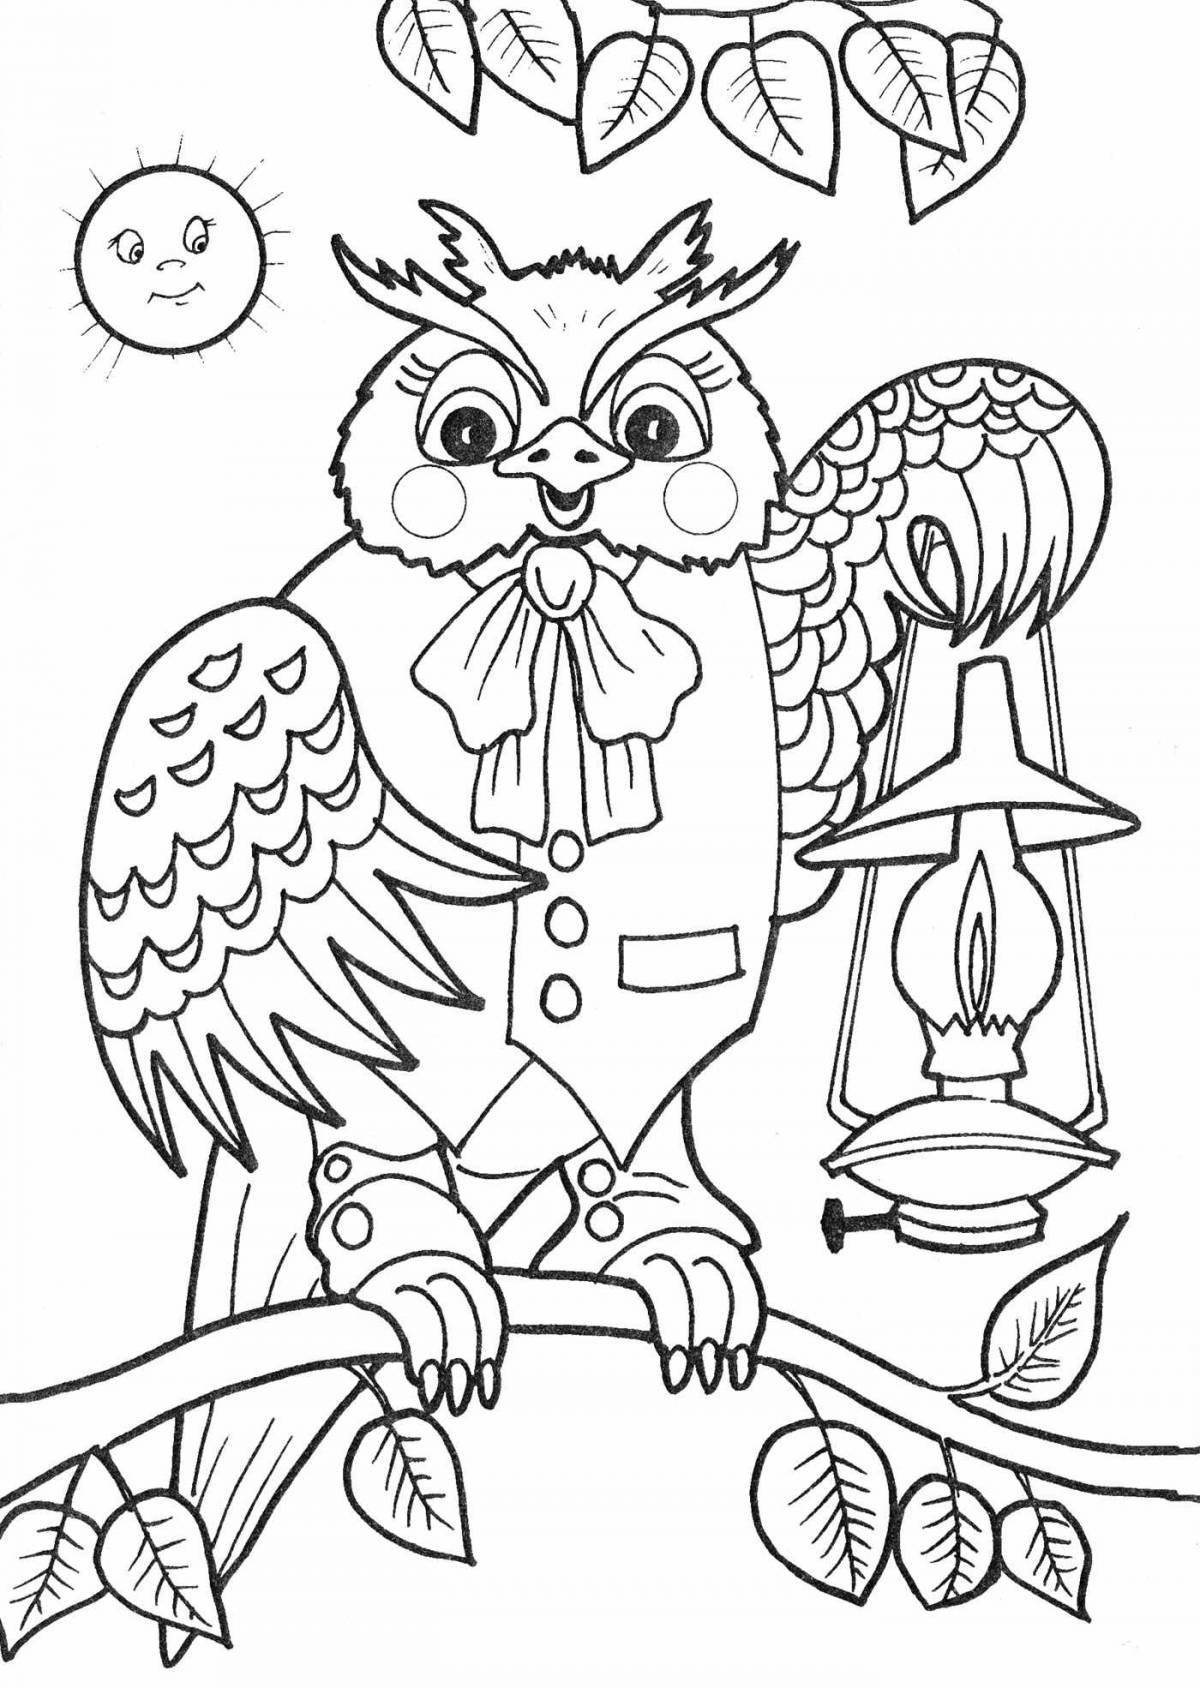 Great wise owl coloring book for kids